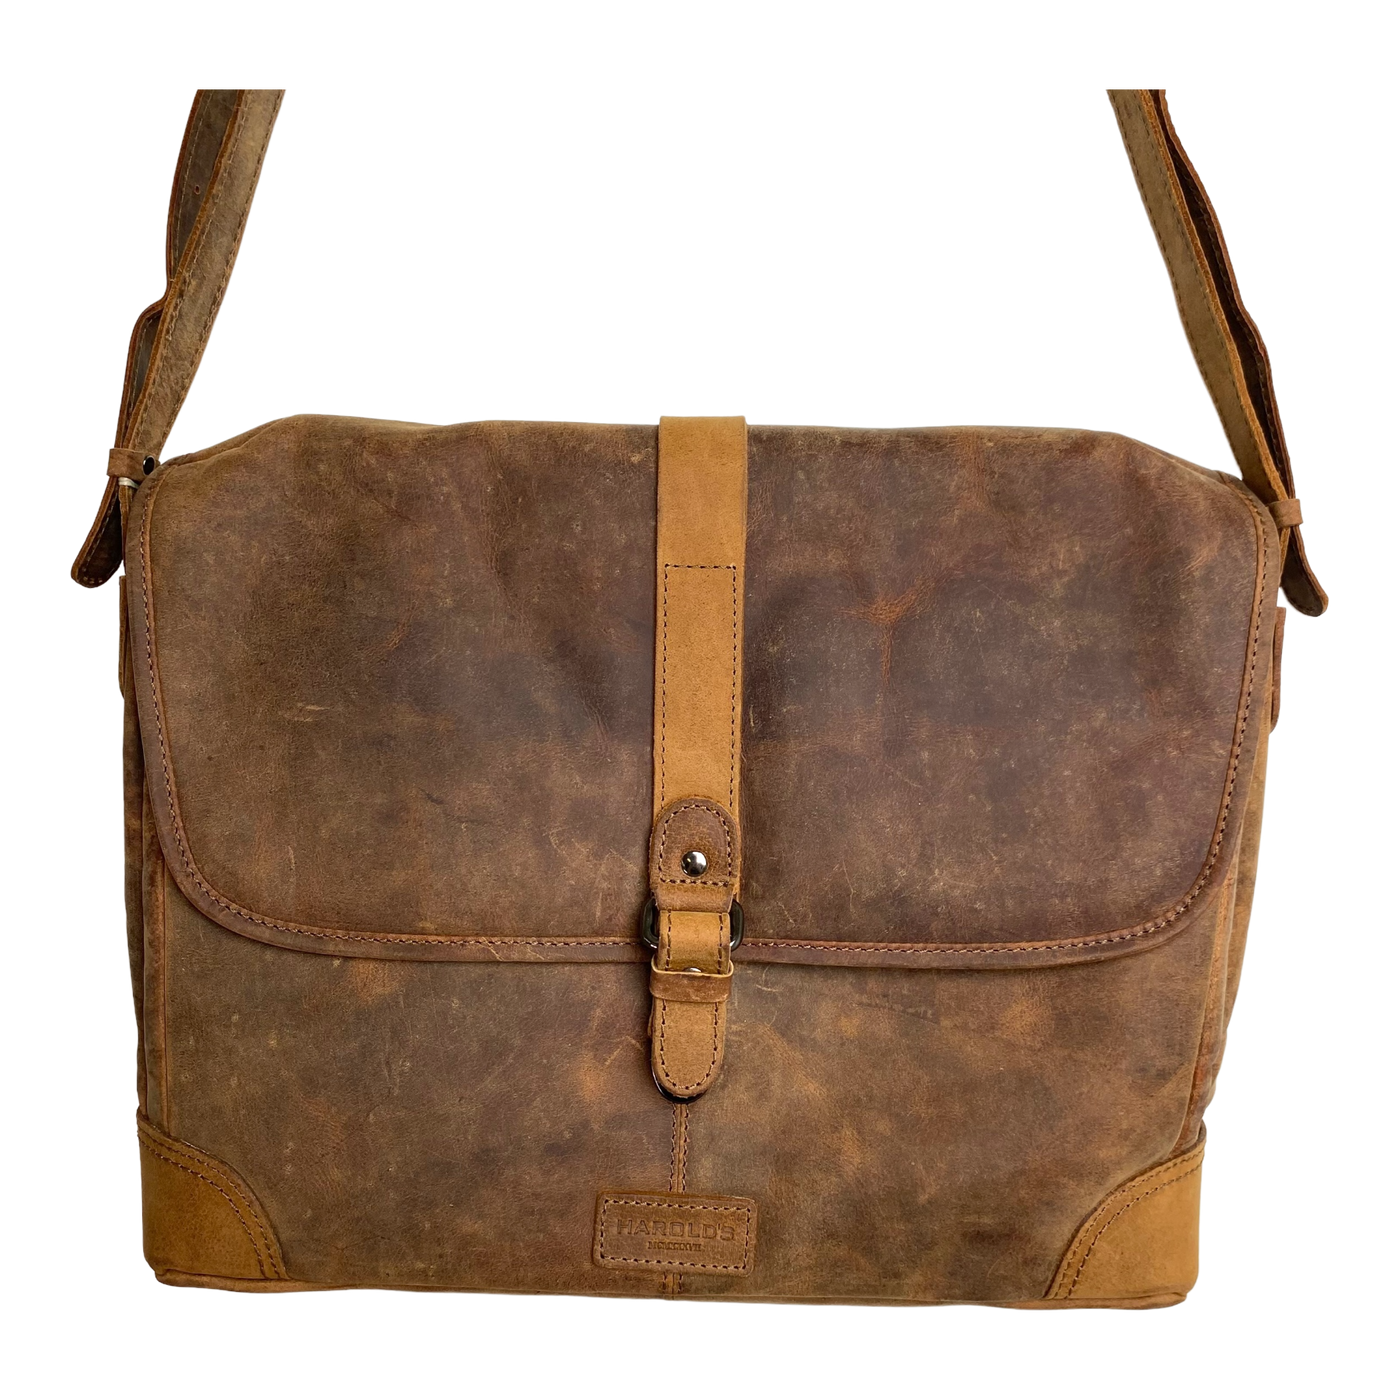 Harold's Bags leather antic business messenger bag, nature